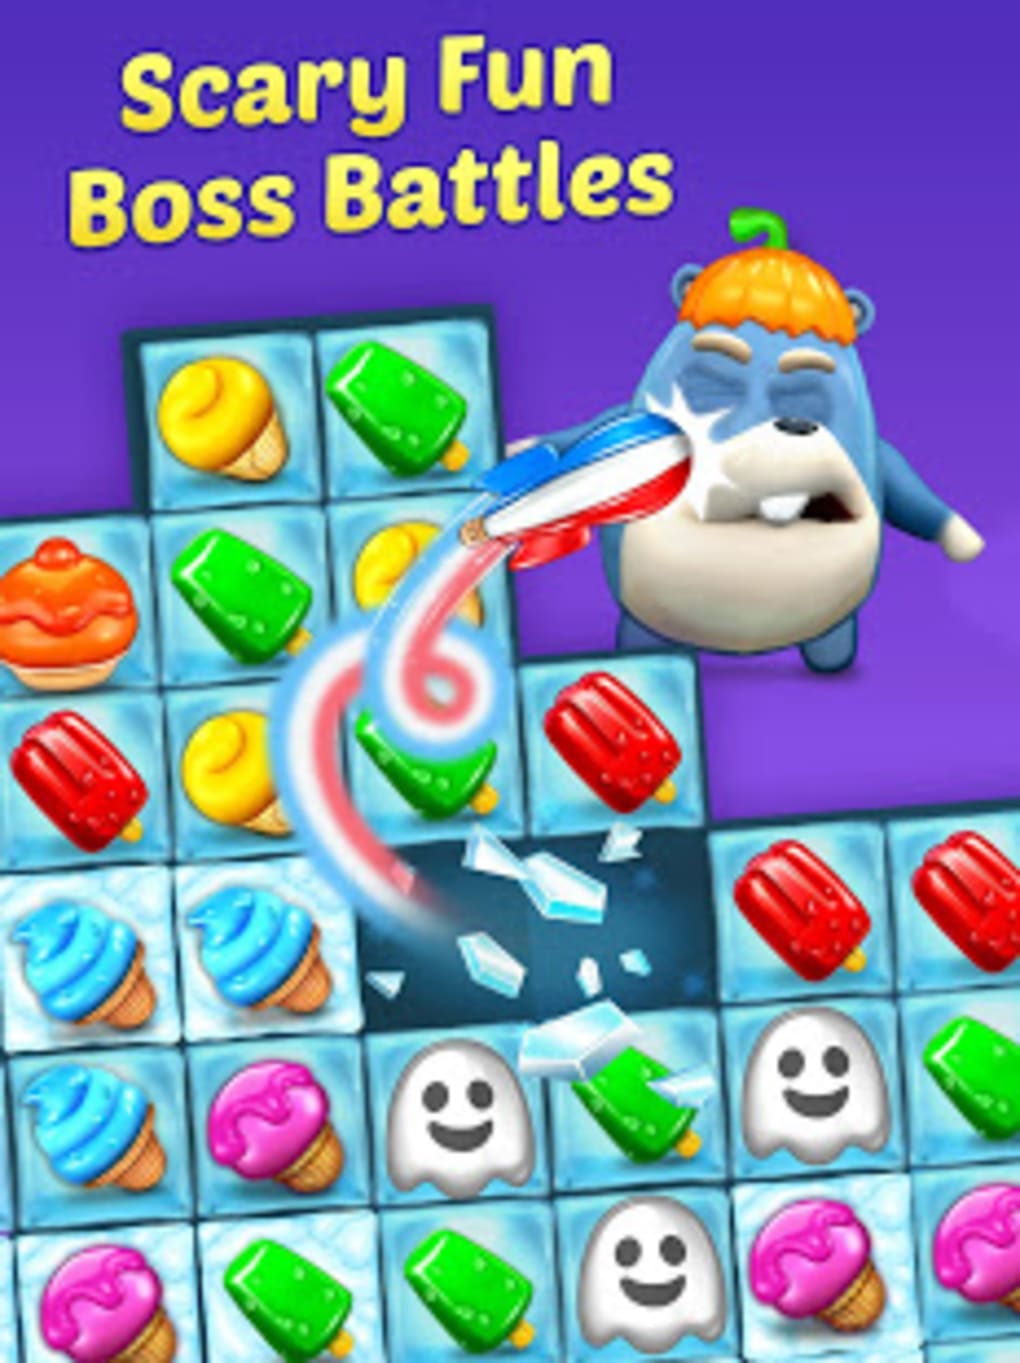 Balloon Paradise - Match 3 Puzzle Game instal the new version for windows